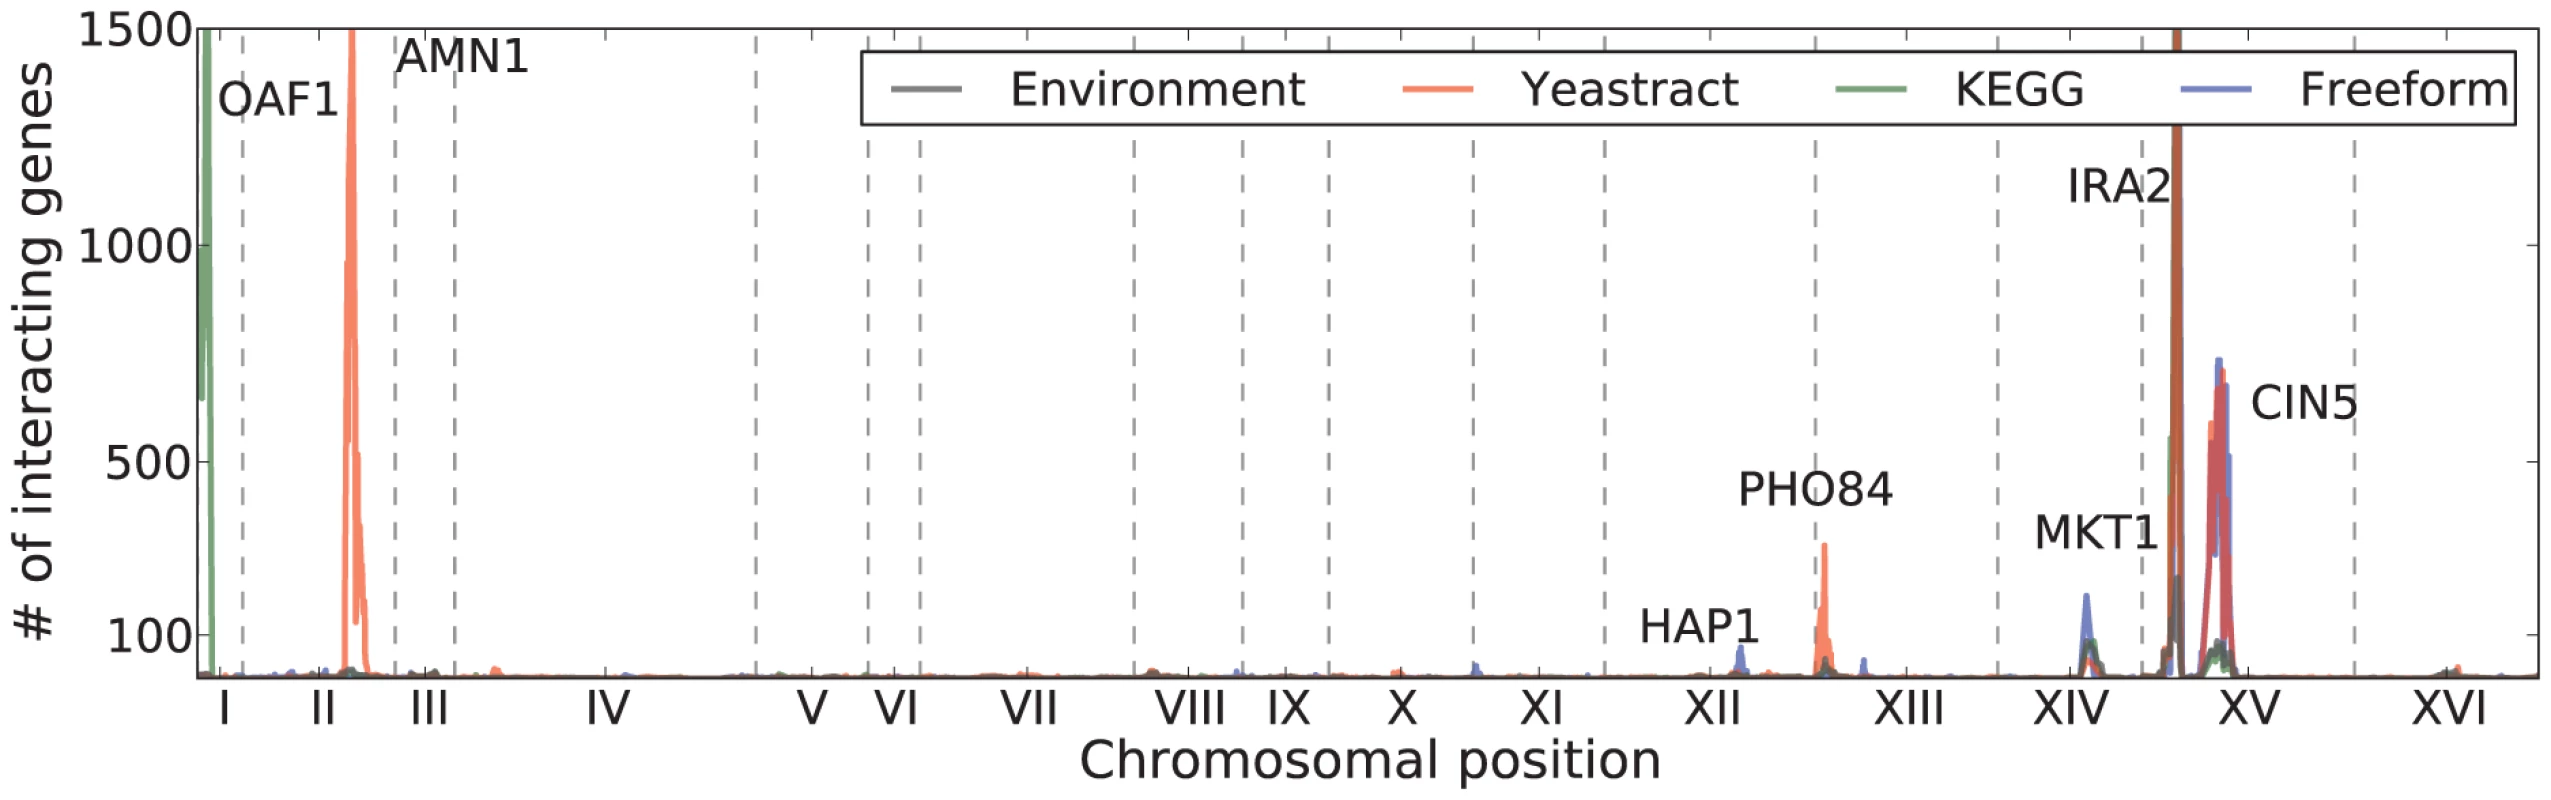 Number of genes affected by a genotype-factor interaction for each locus for Yeastract factors (blue), KEGG factors (red), freeform factors (green), and environment (gray).